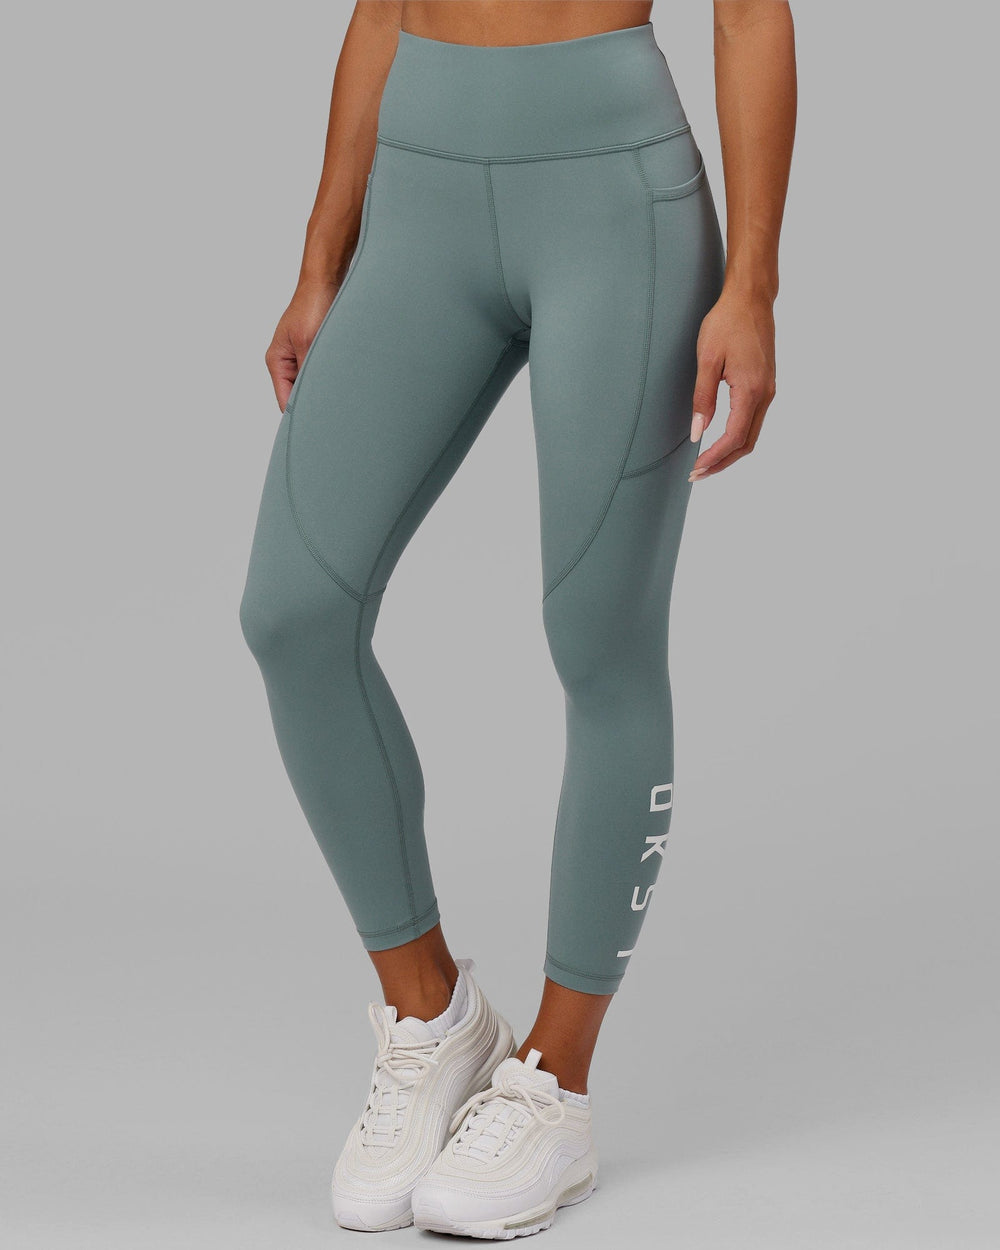 Woman wearing Rep 7/8 Length Tight - Eclipse